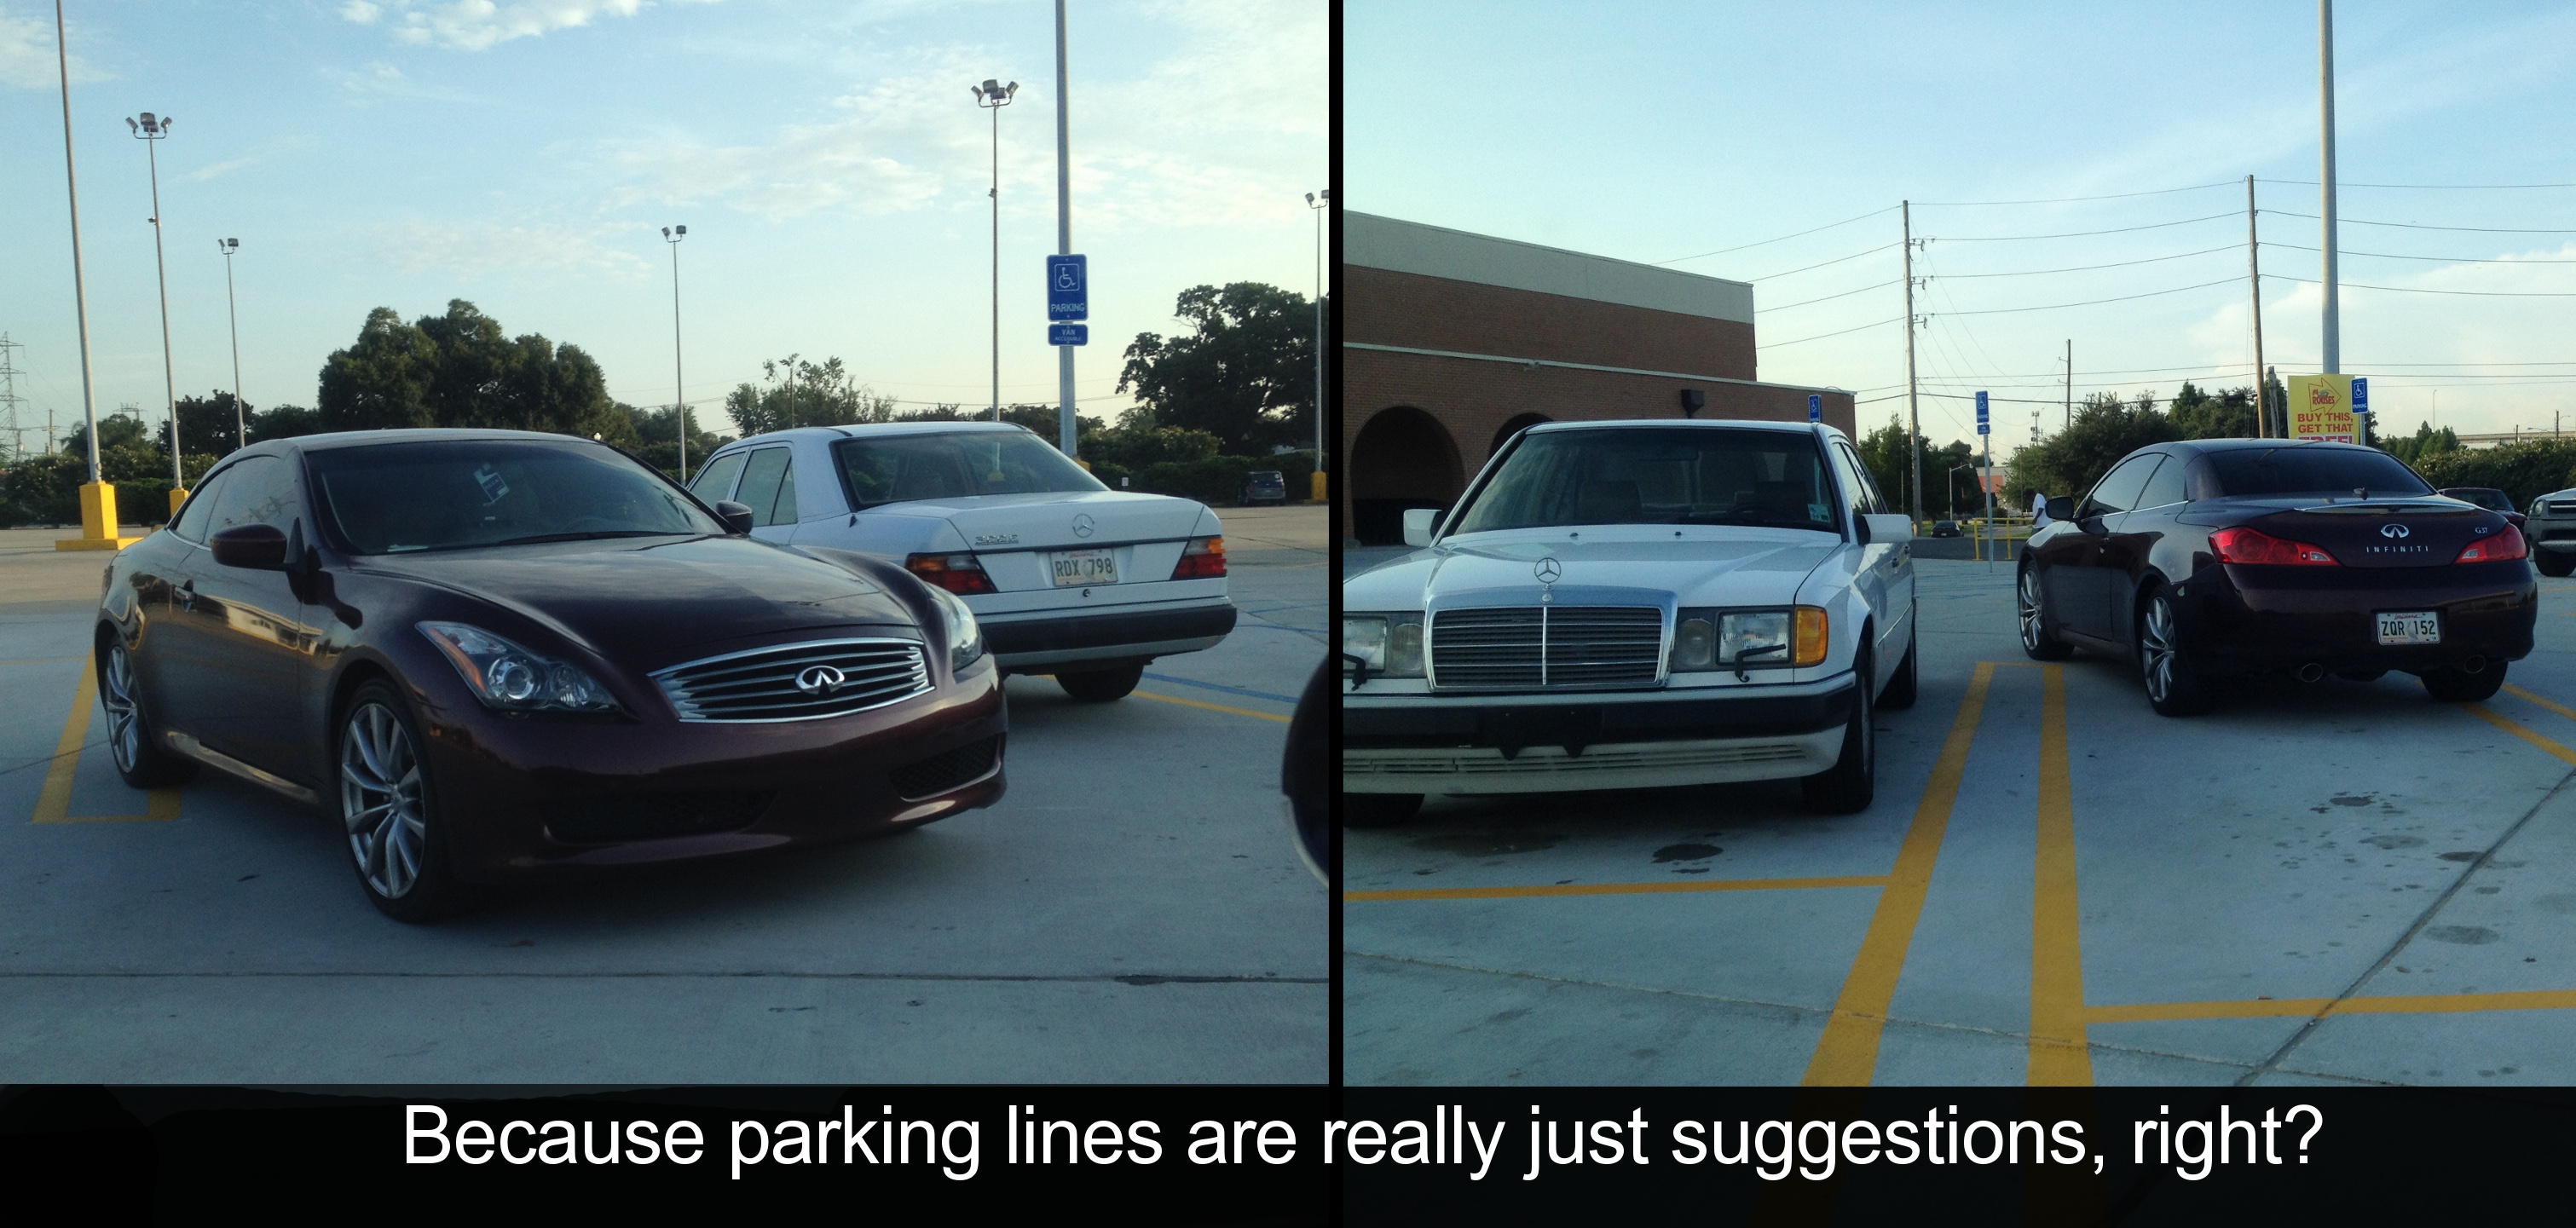 Frustrating pet peeves - parking - Because parking lines are really just suggestions, right?